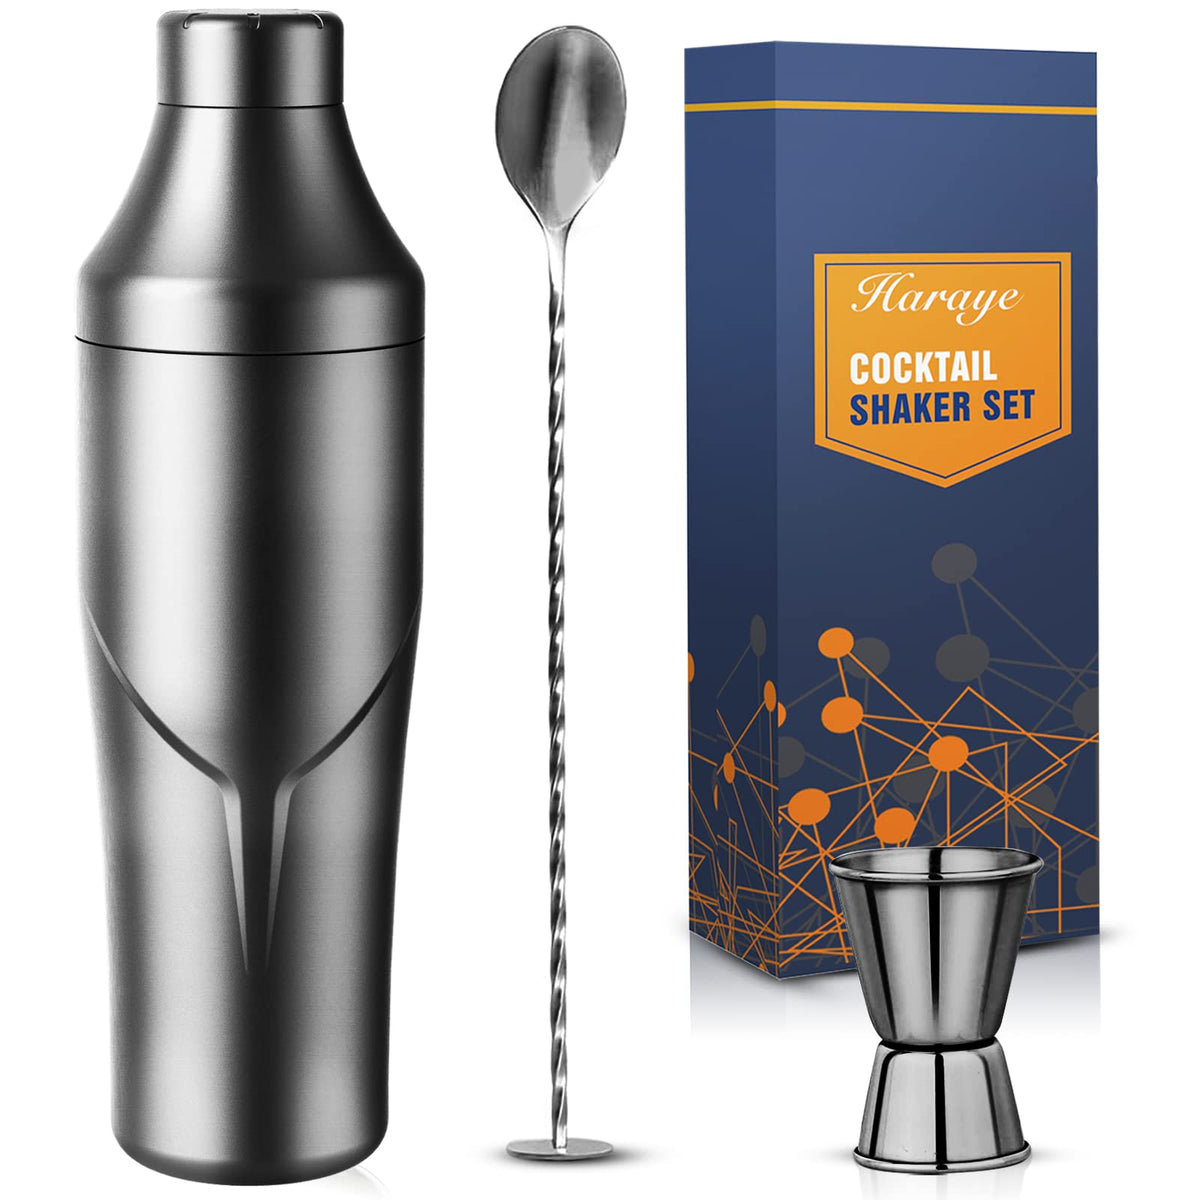 Elevated Craft Hybrid Cocktail Shaker - Built-In Jigger / Double